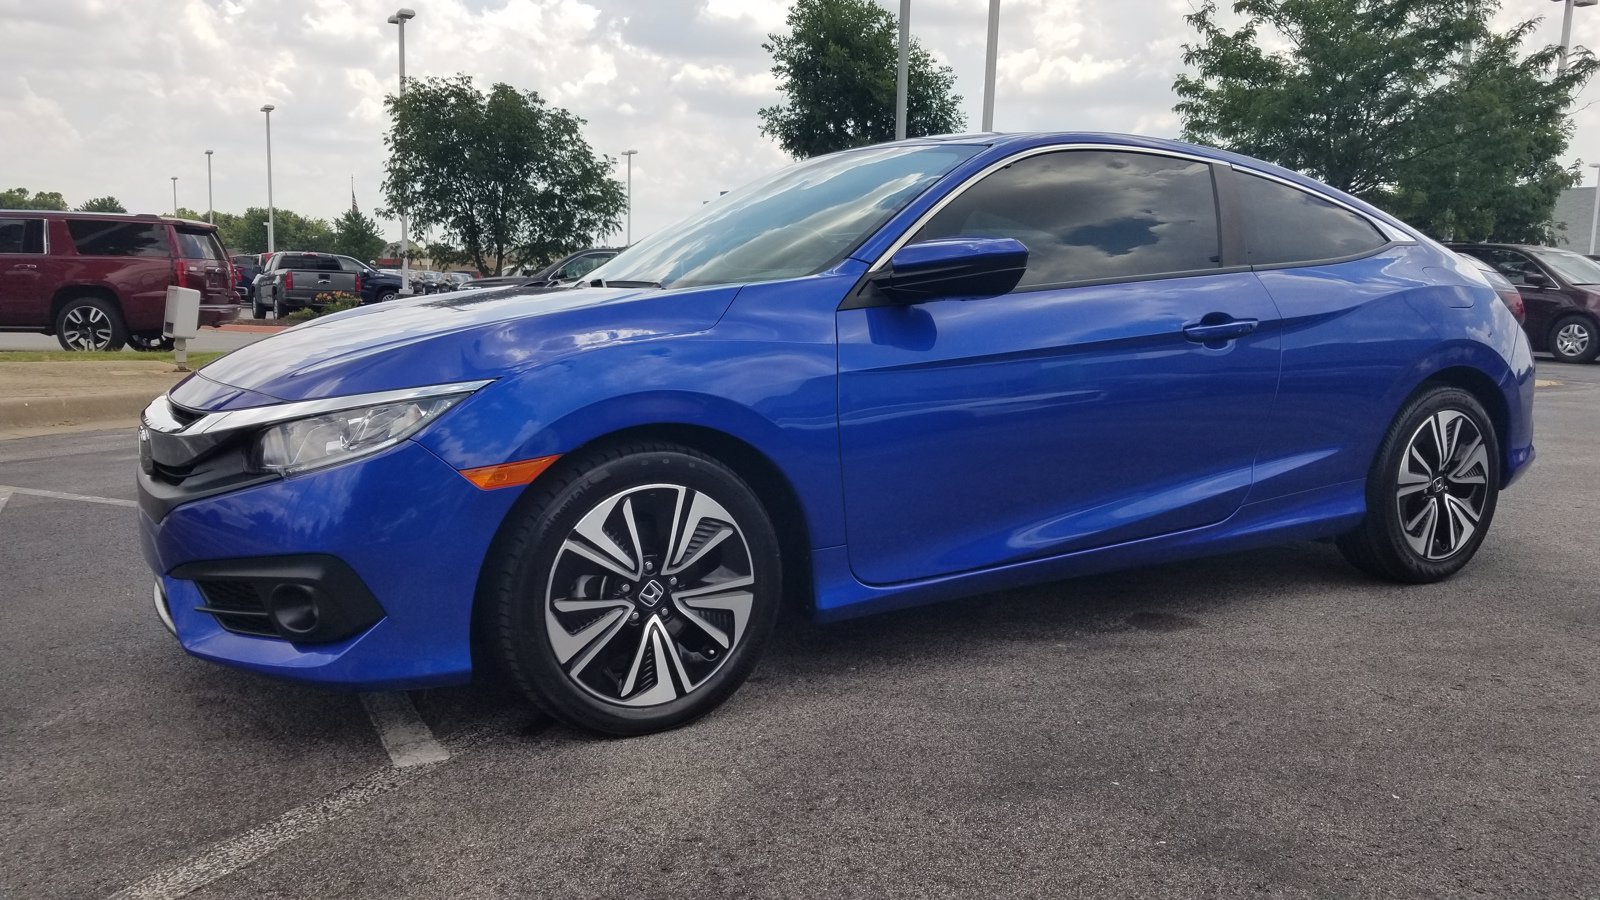 PreOwned 2017 Honda Civic Coupe EXT 2dr Car in